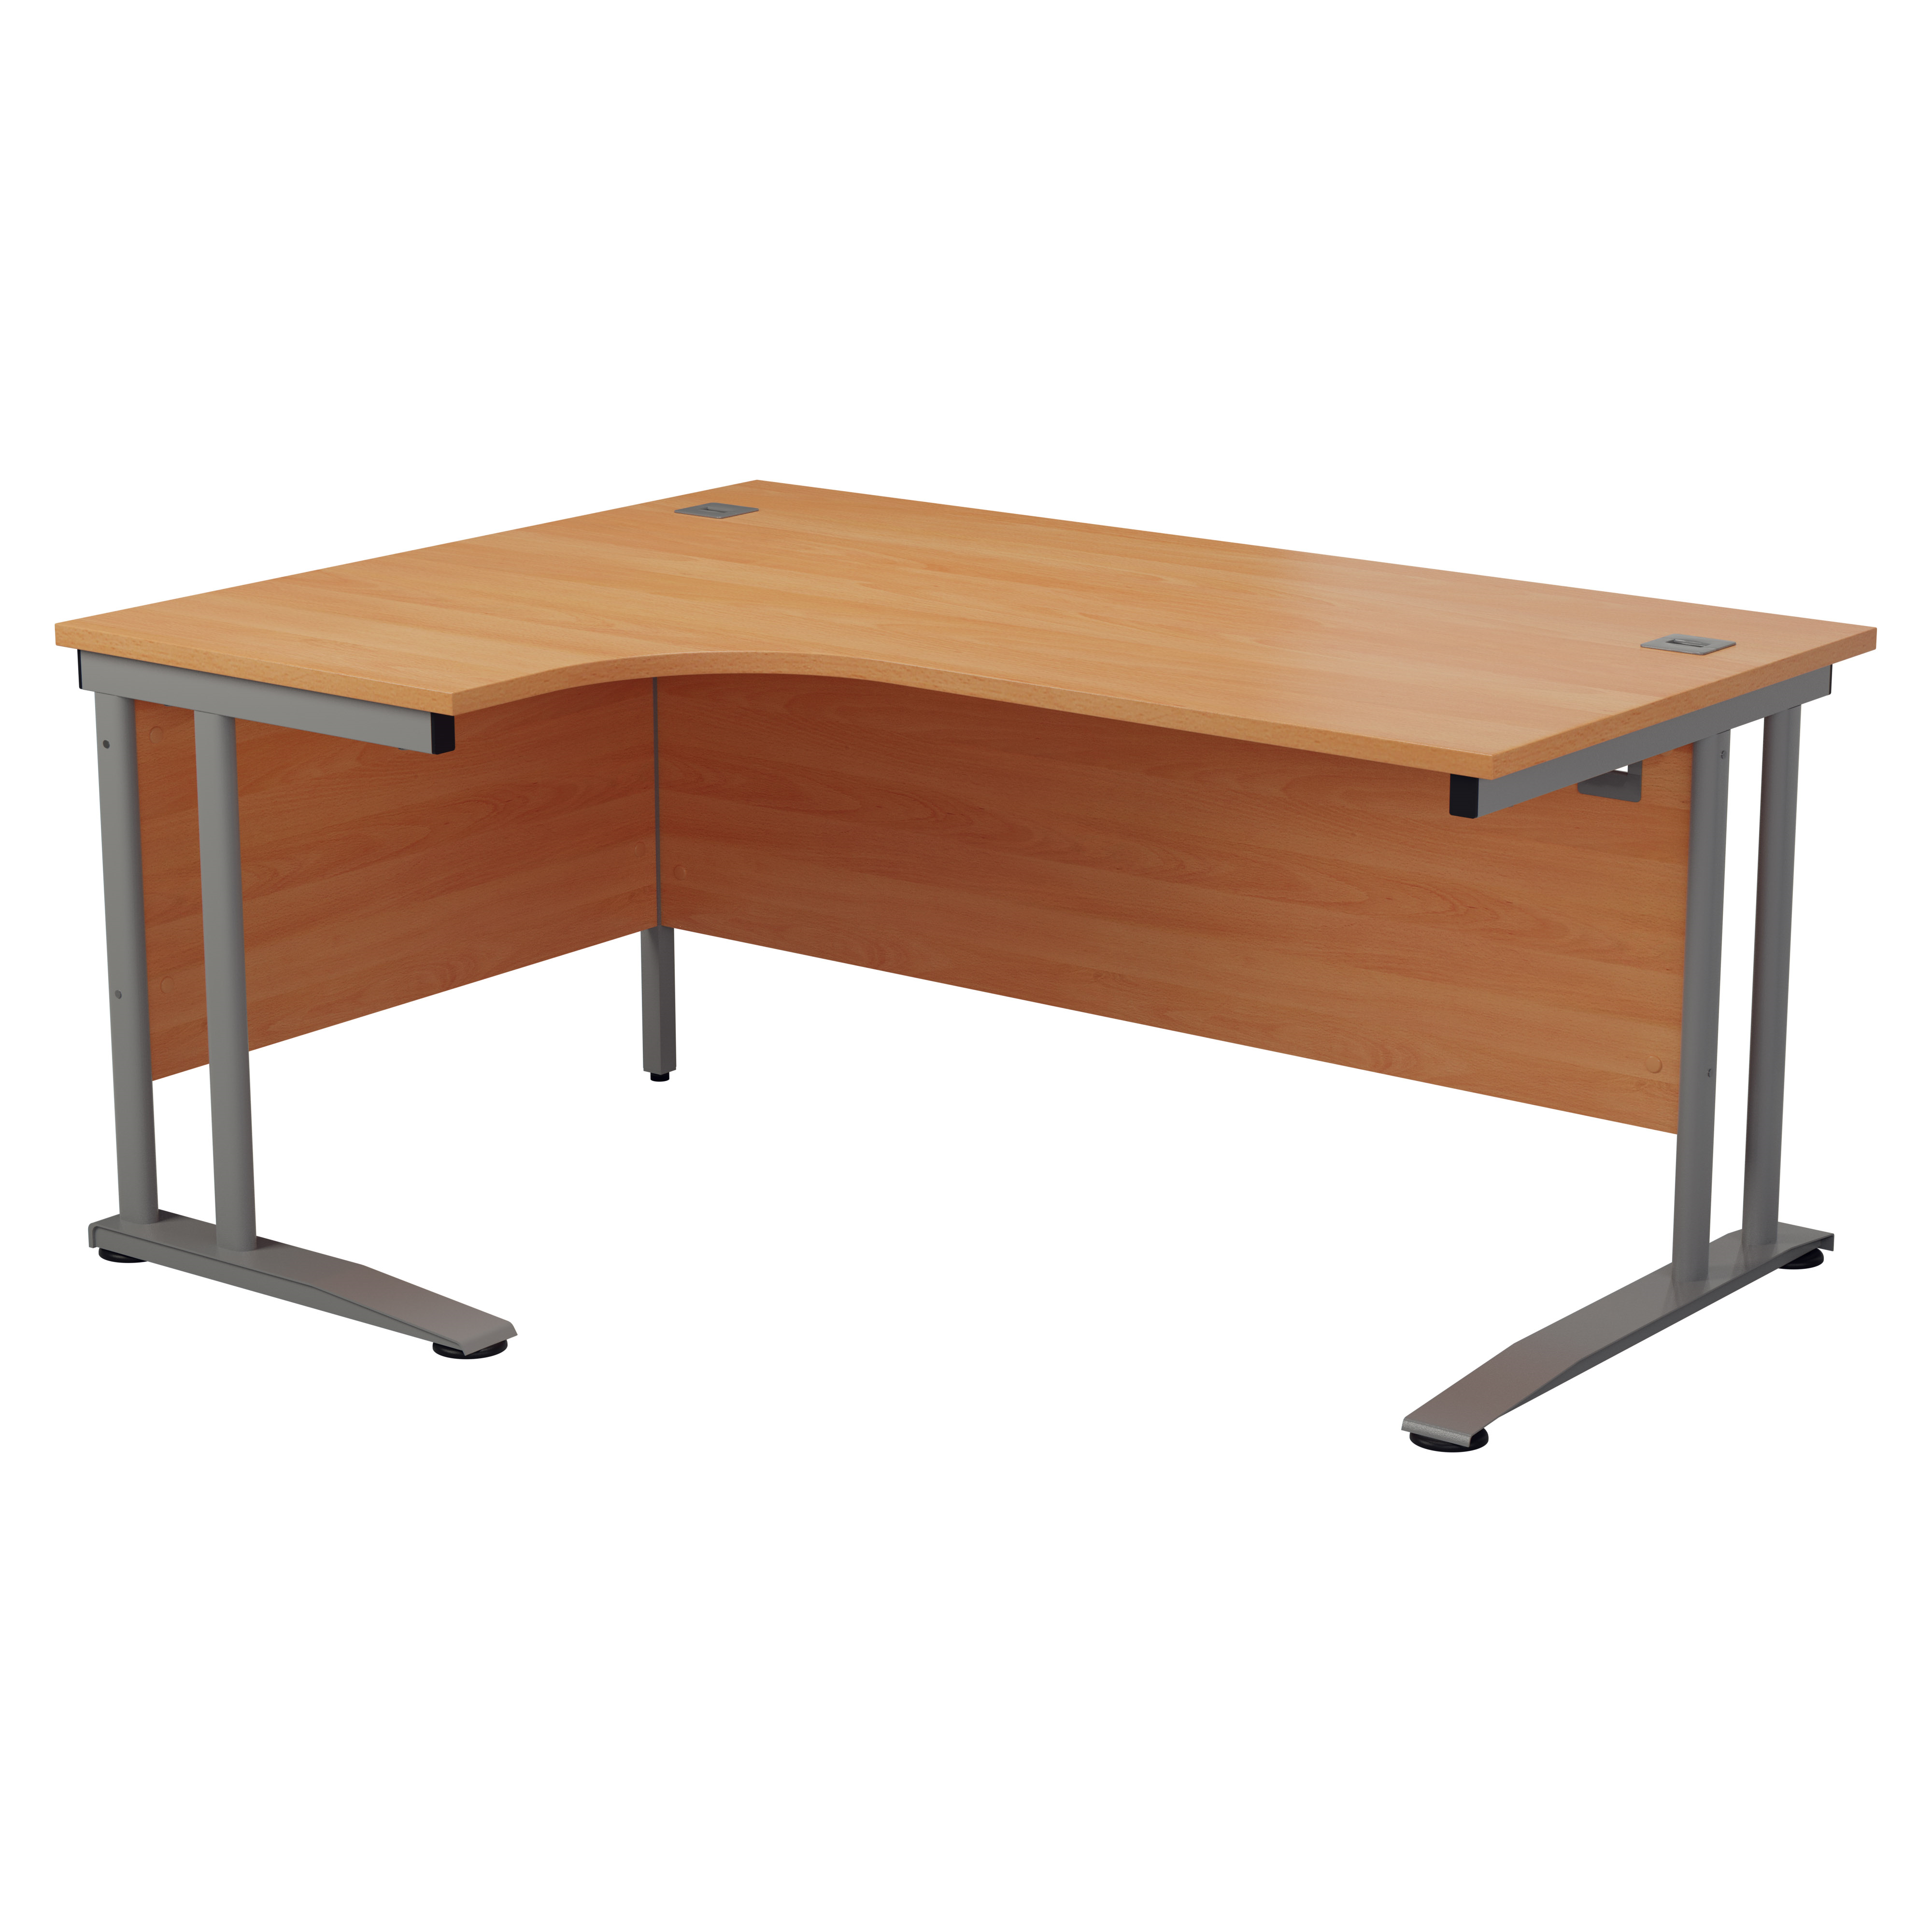 One Cantilever Plus 1600 Crescent Cantilever Workstation LH - Beech / Silver